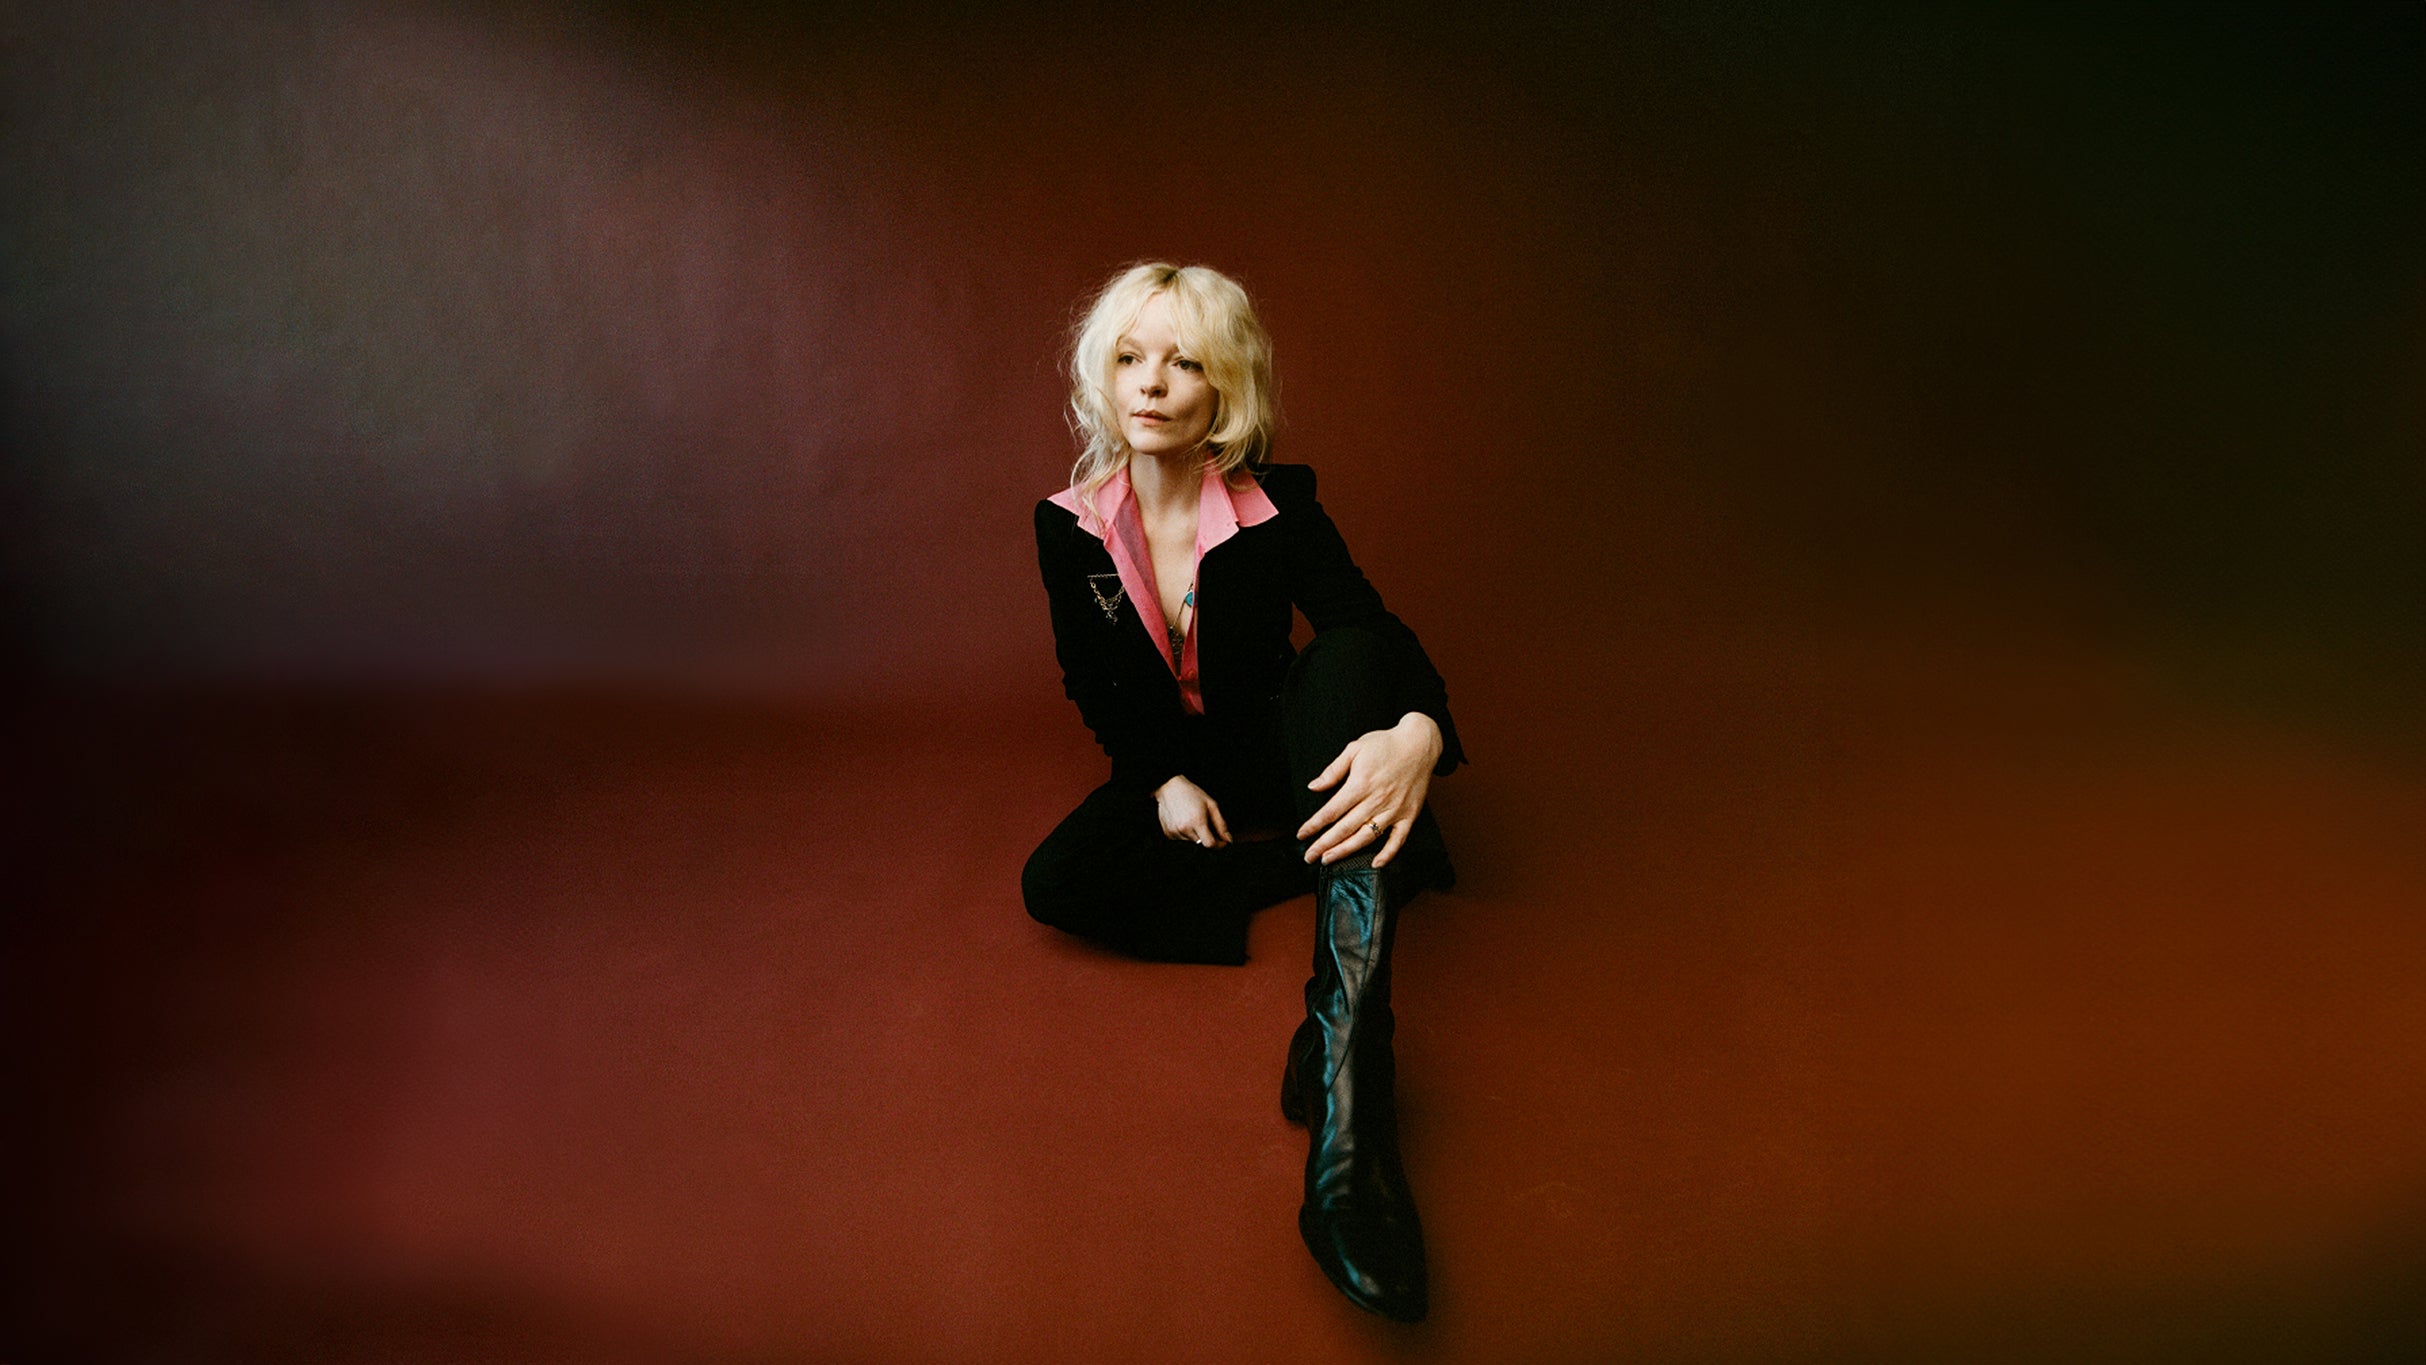 Jessica Pratt free presale pasword for early tickets in New York